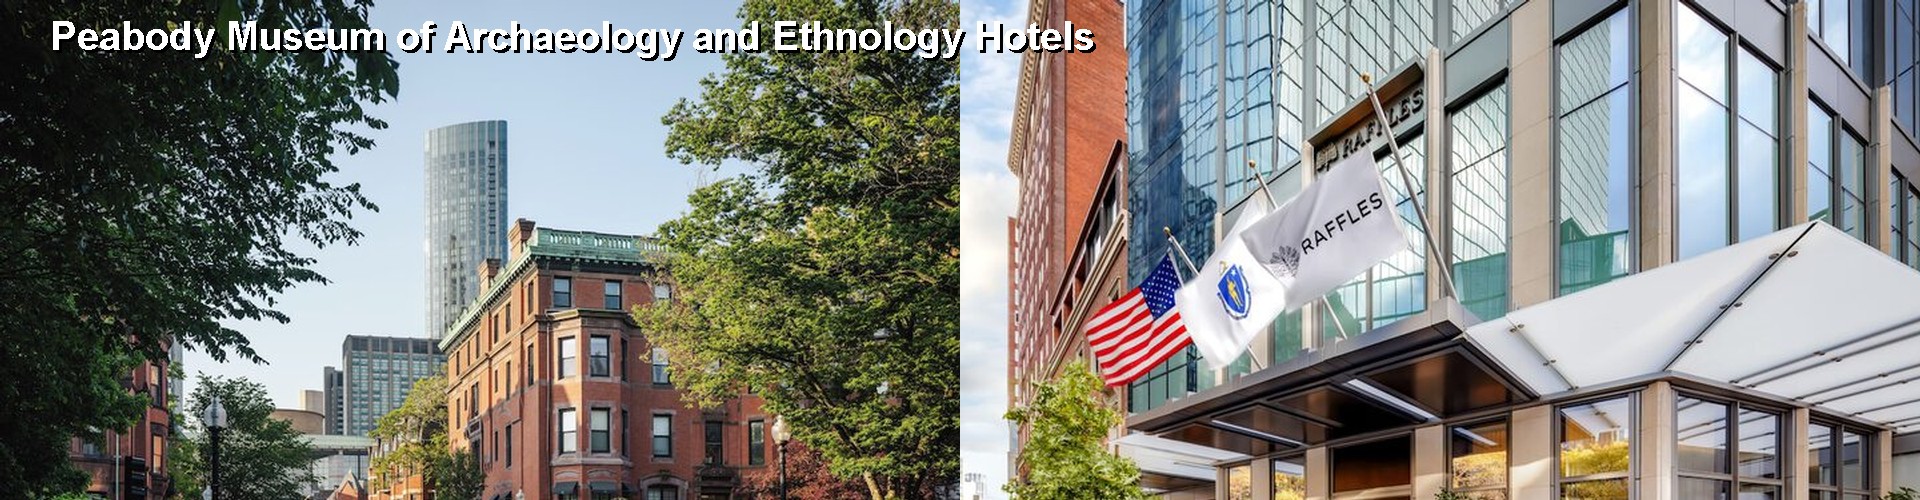 5 Best Hotels near Peabody Museum of Archaeology and Ethnology